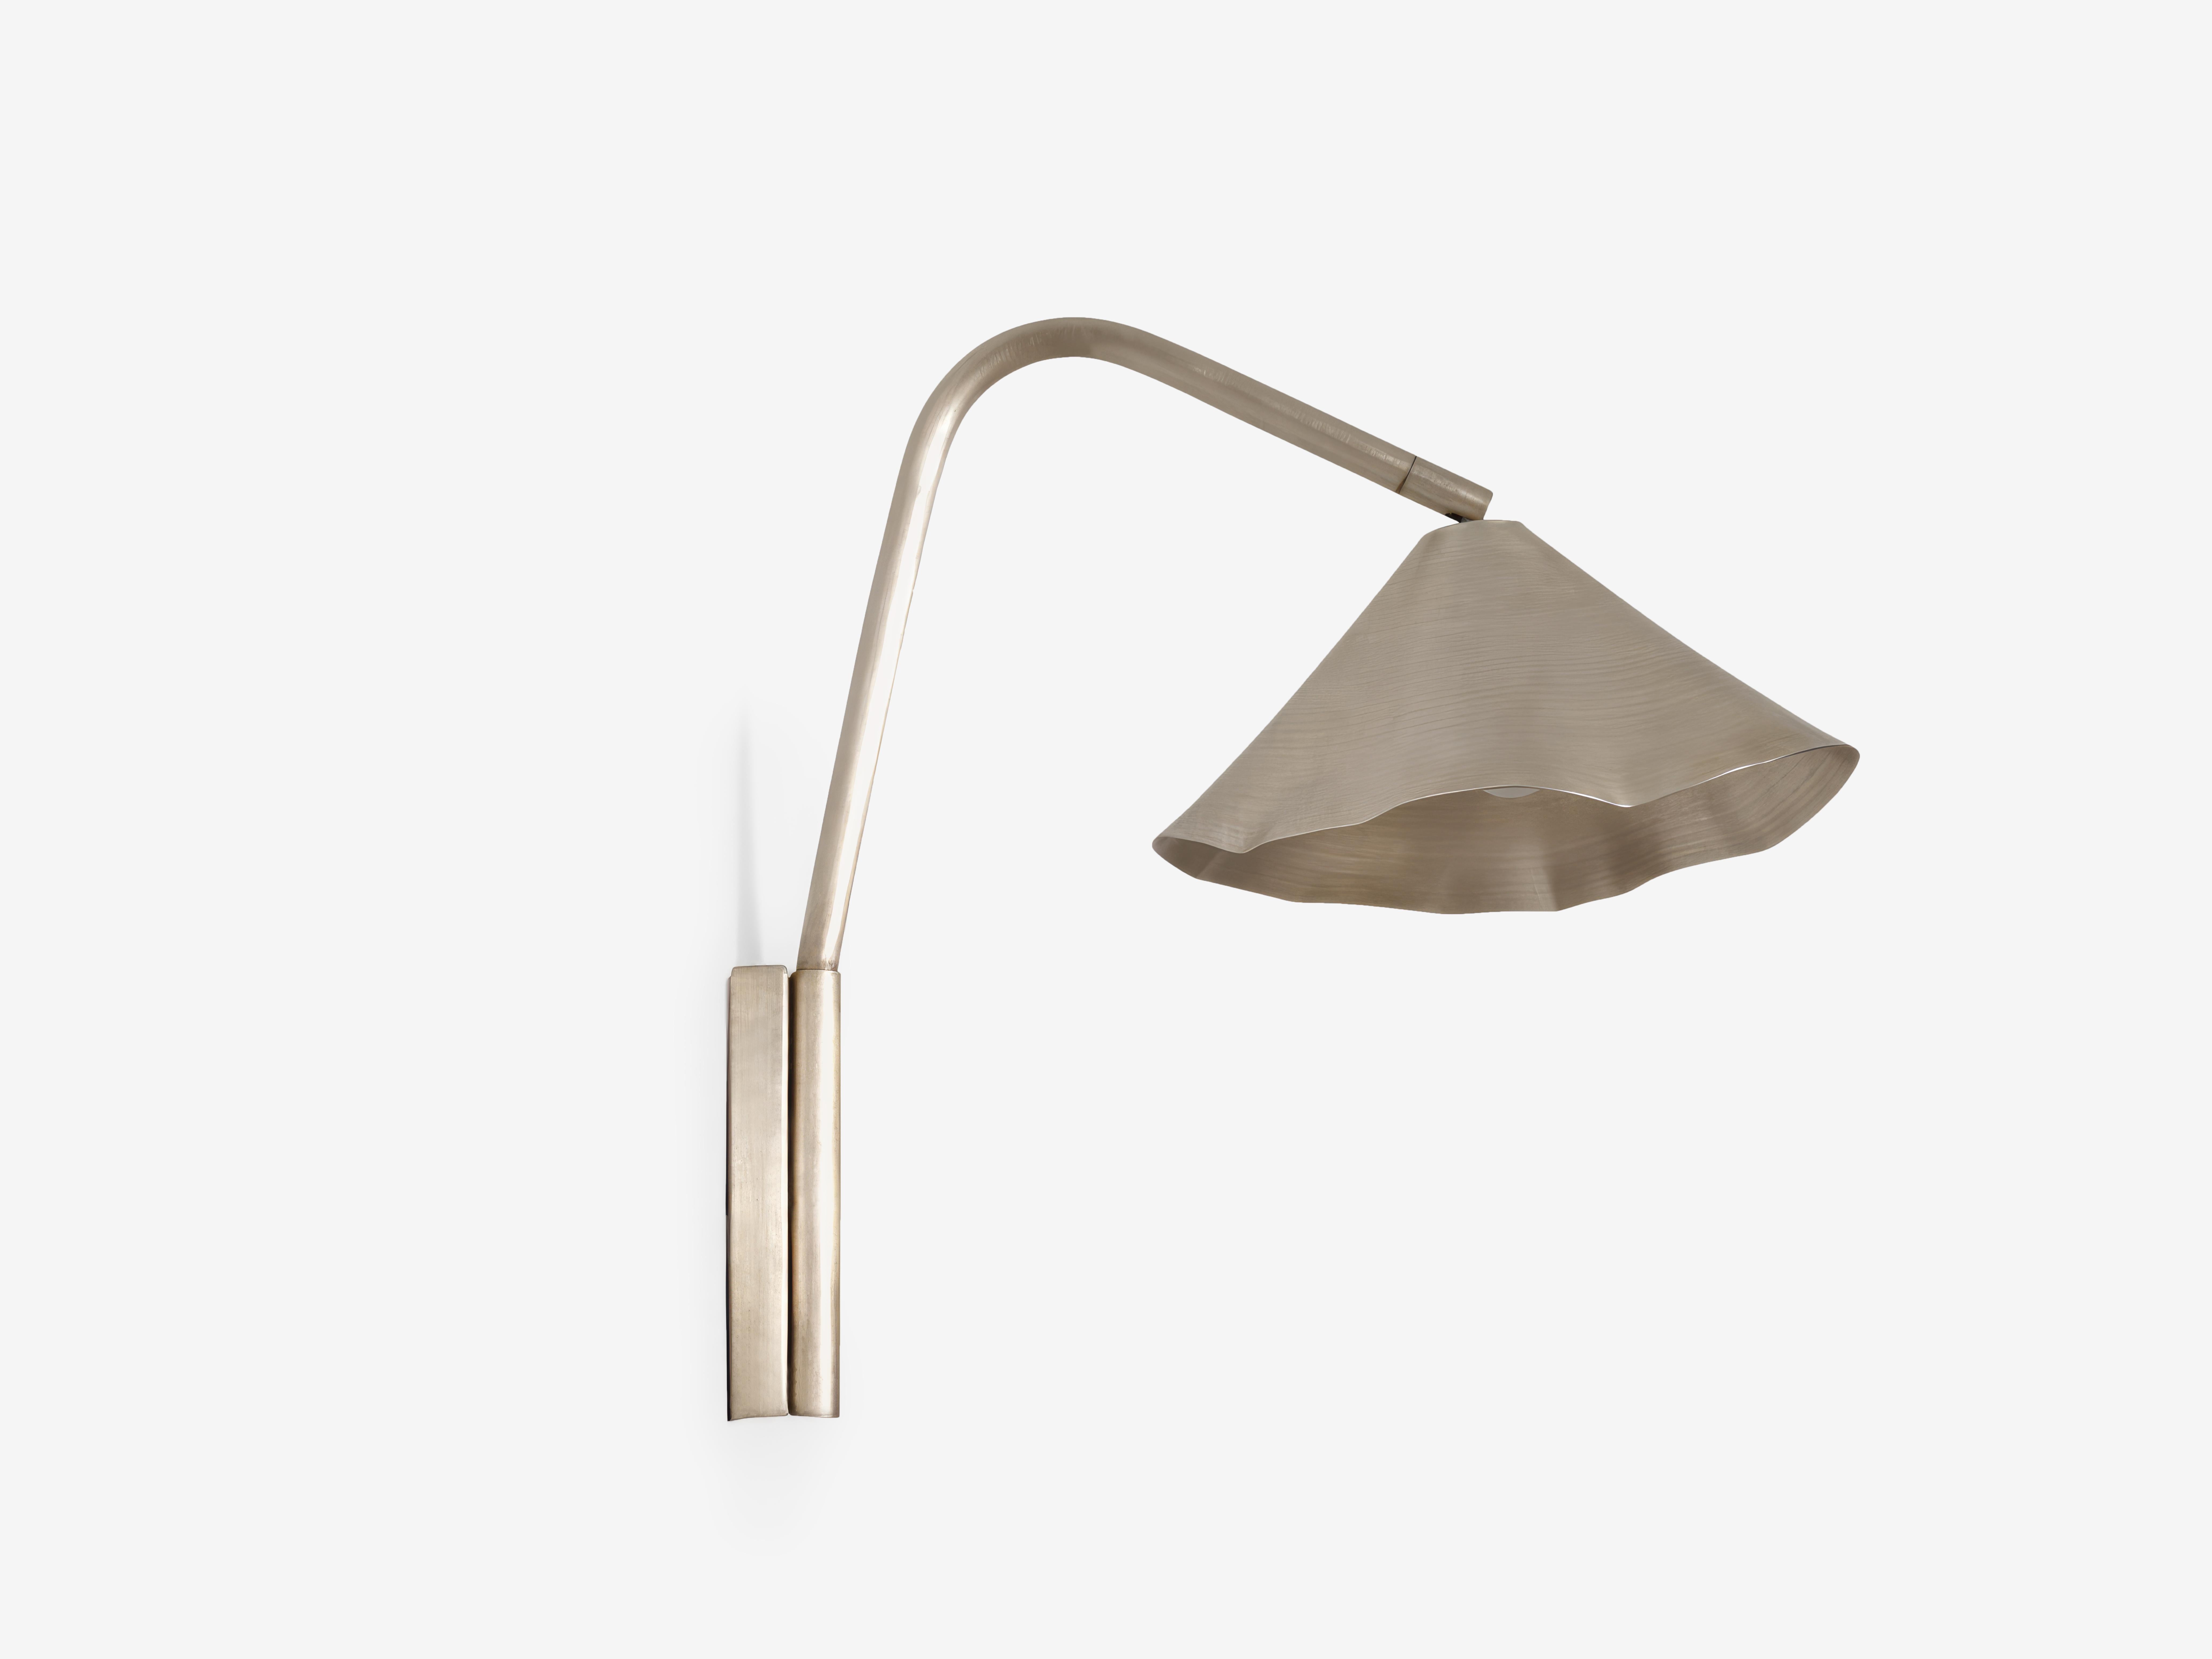 Silver Antica II Sconce by OHLA STUDIO
Dimensions: D 40 x W 25 x H 40 cm 
Materials: Copper.
1 kg

Available in other finishes: Silver, Forest, and Teal.
Available in dimmer and simple versions.

A pre-Hispanic smithing tradition thrives by